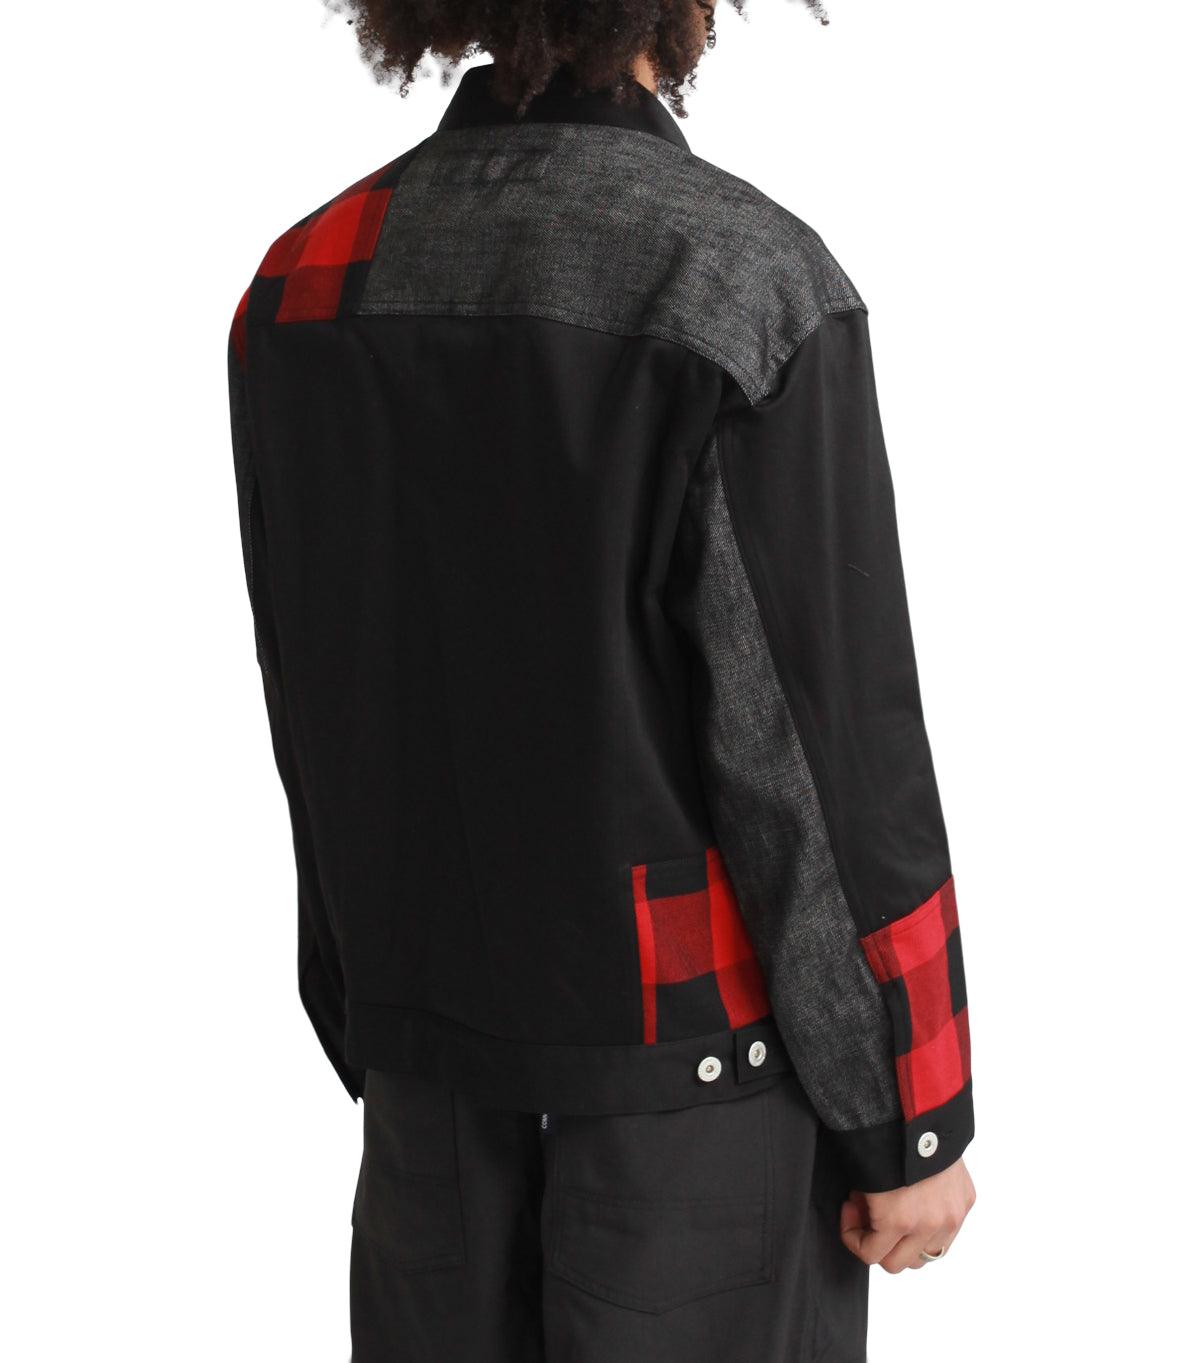 CdG Homme Multi Fabric Jacket Black Red | SOMEWHERE